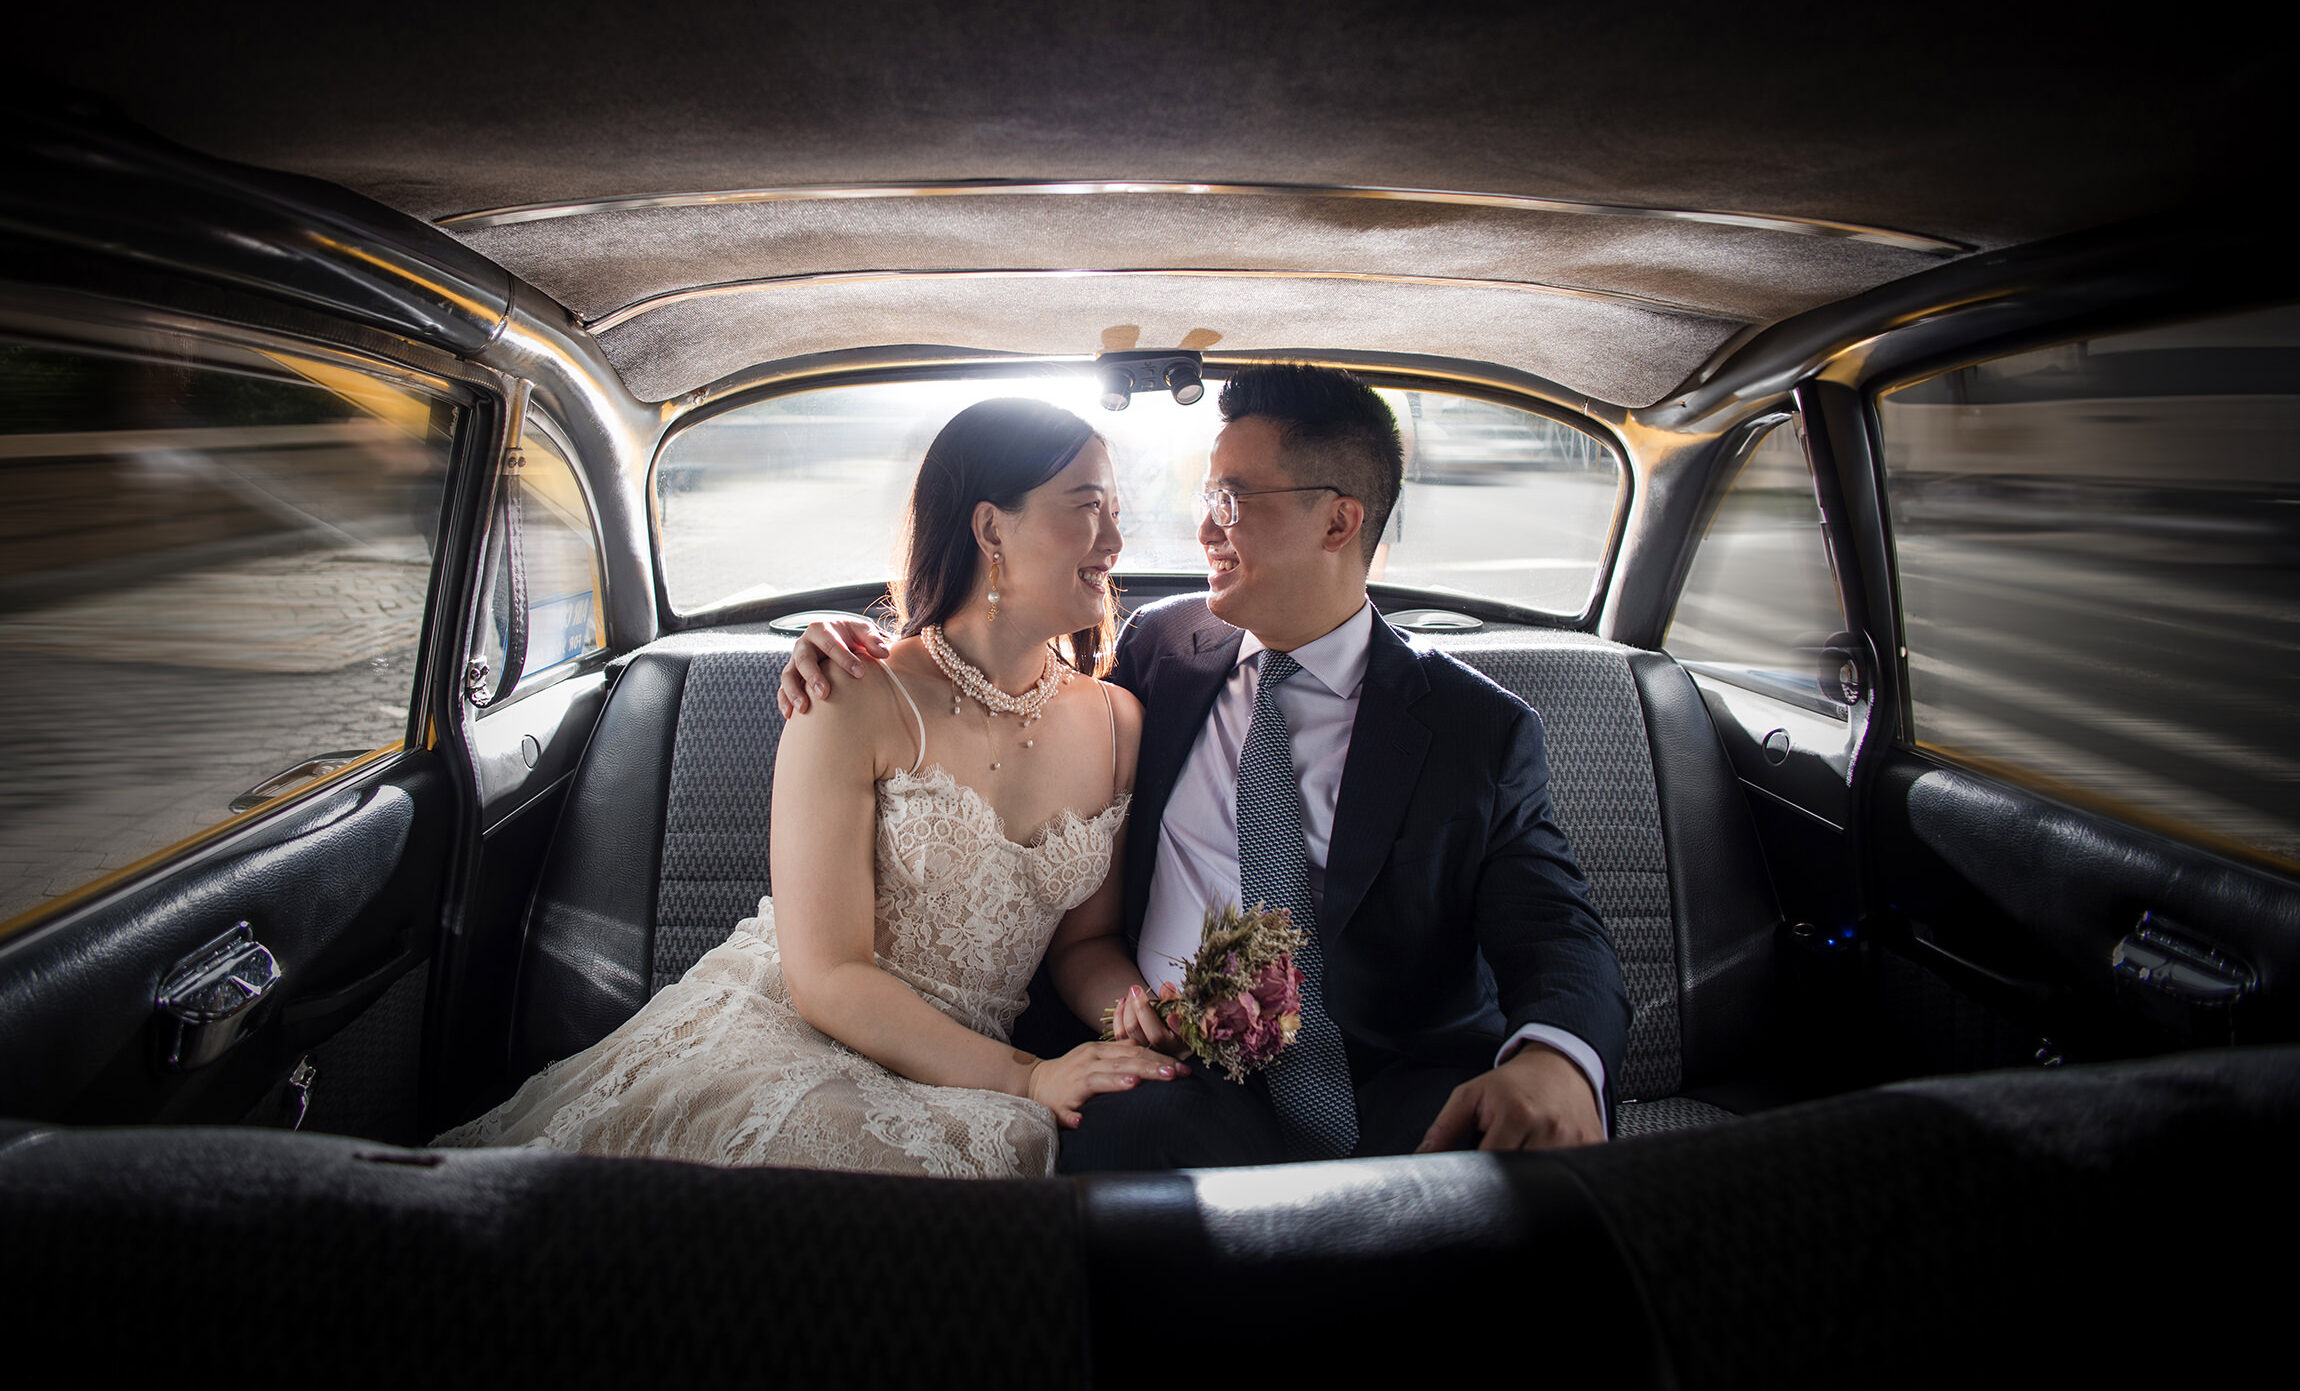 A bride and groom eloping in the back seat of a NYC taxi.